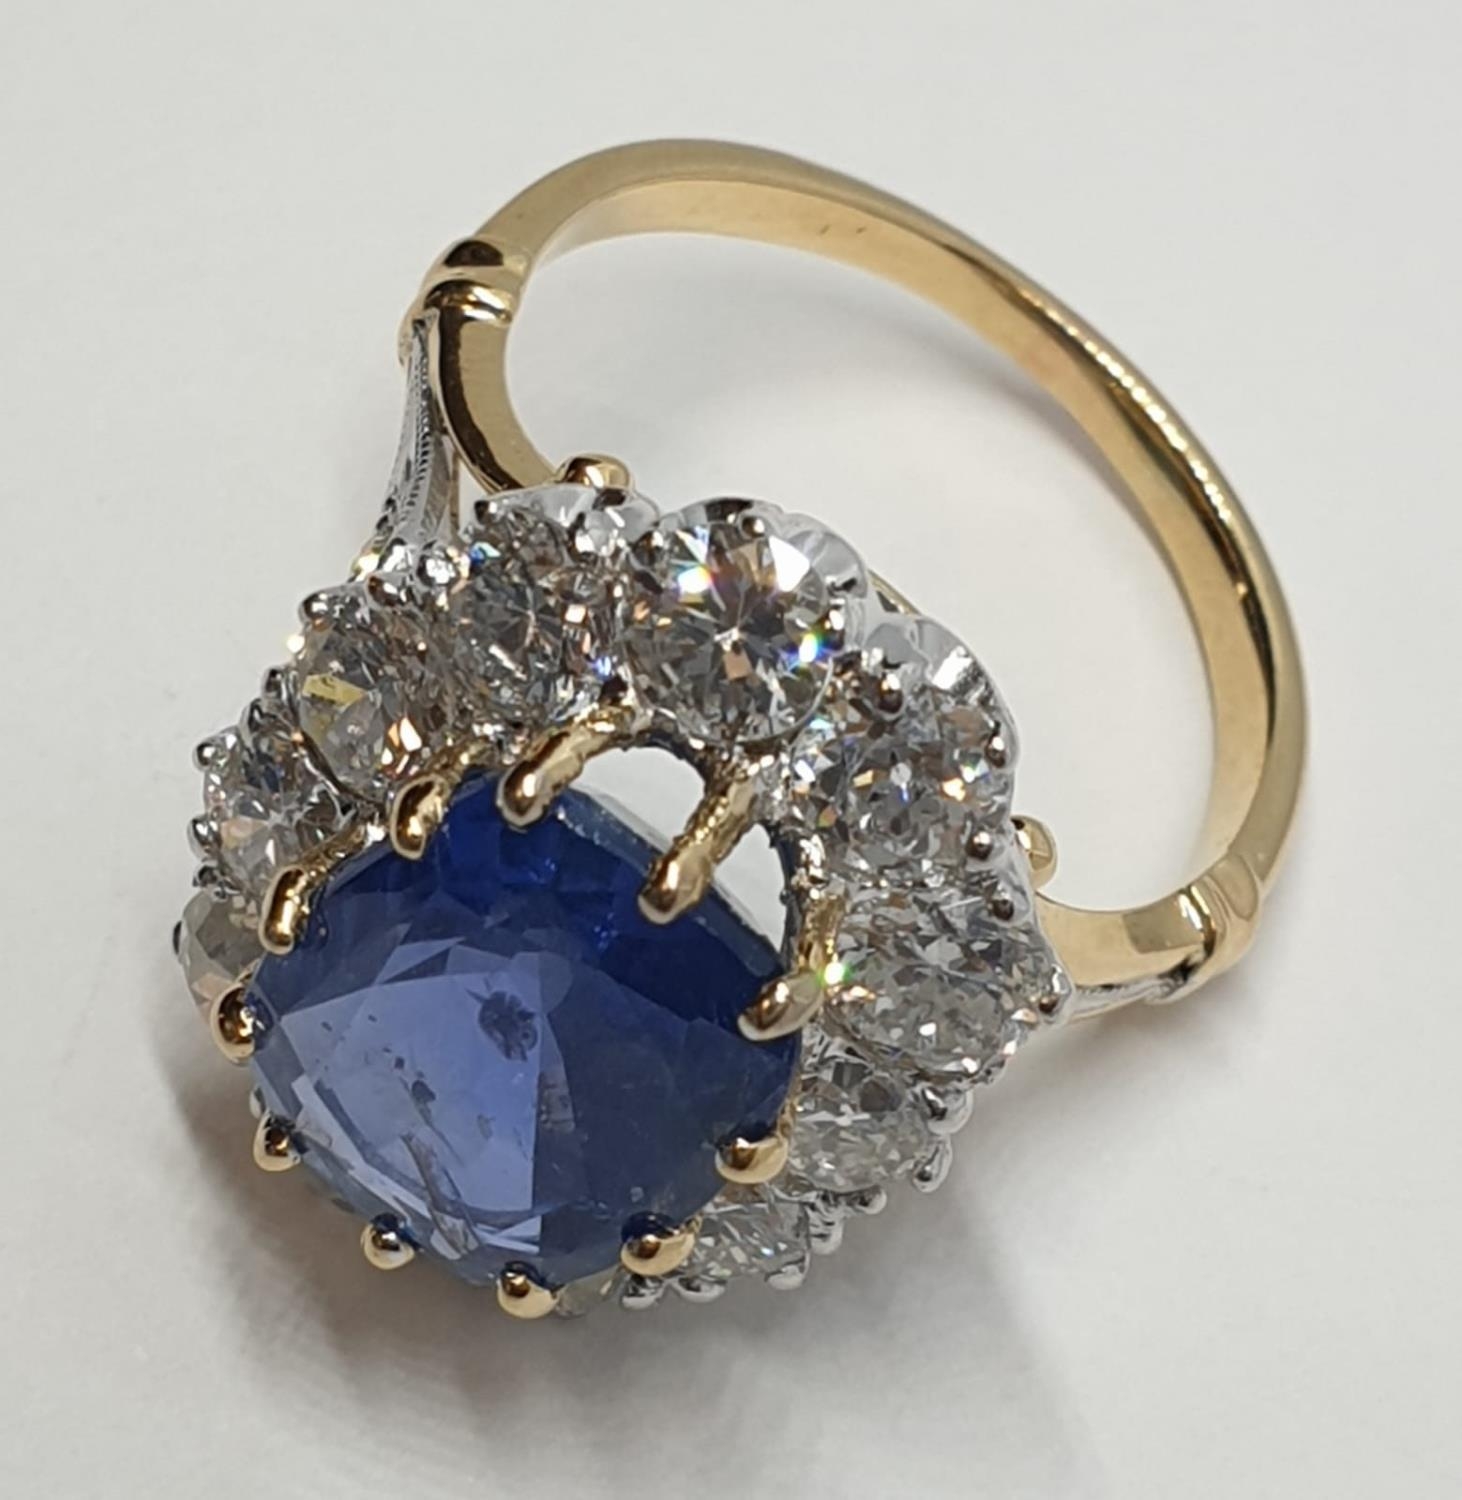 5.75ct sapphire ring set in white and yellow gold with over 3.5ct diamonds surrounding, weight 6. - Image 4 of 12